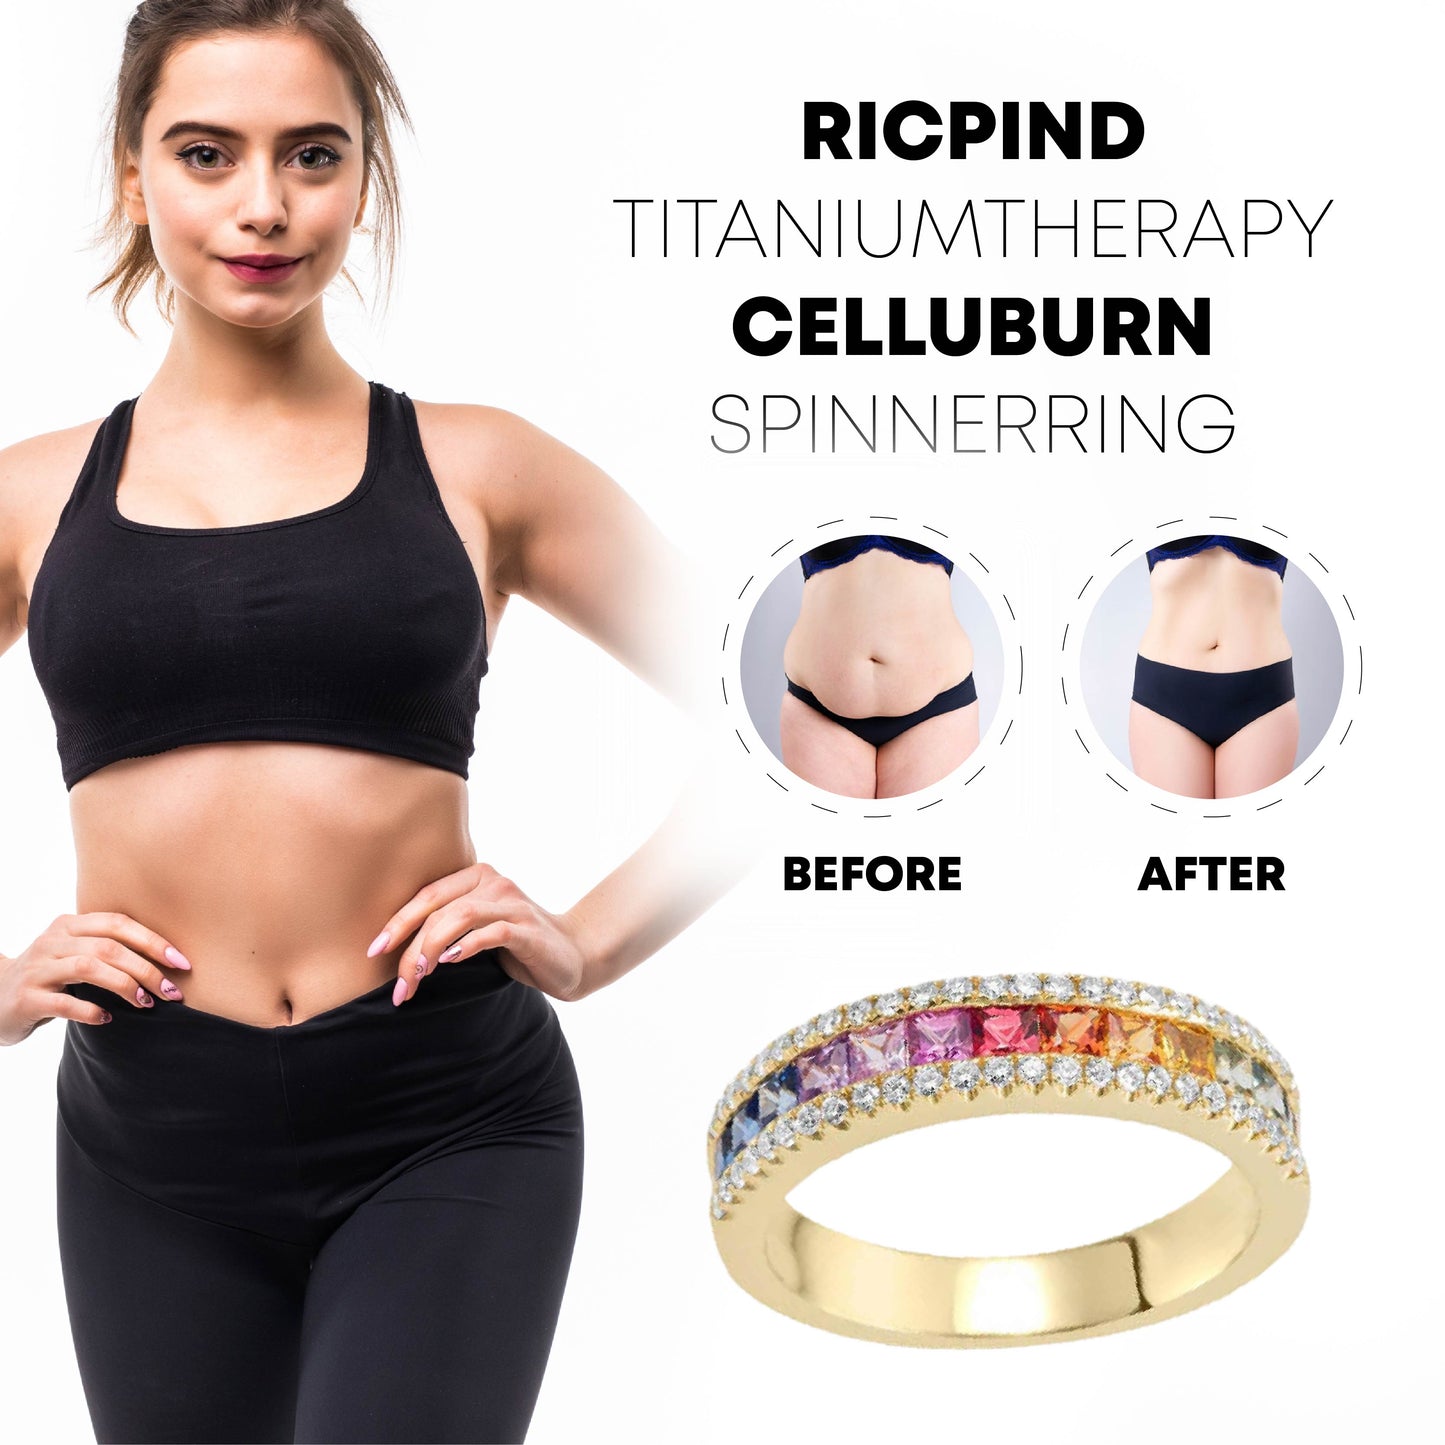 Ricpind TitaniumTherapy CelluBurn SpinnerRing